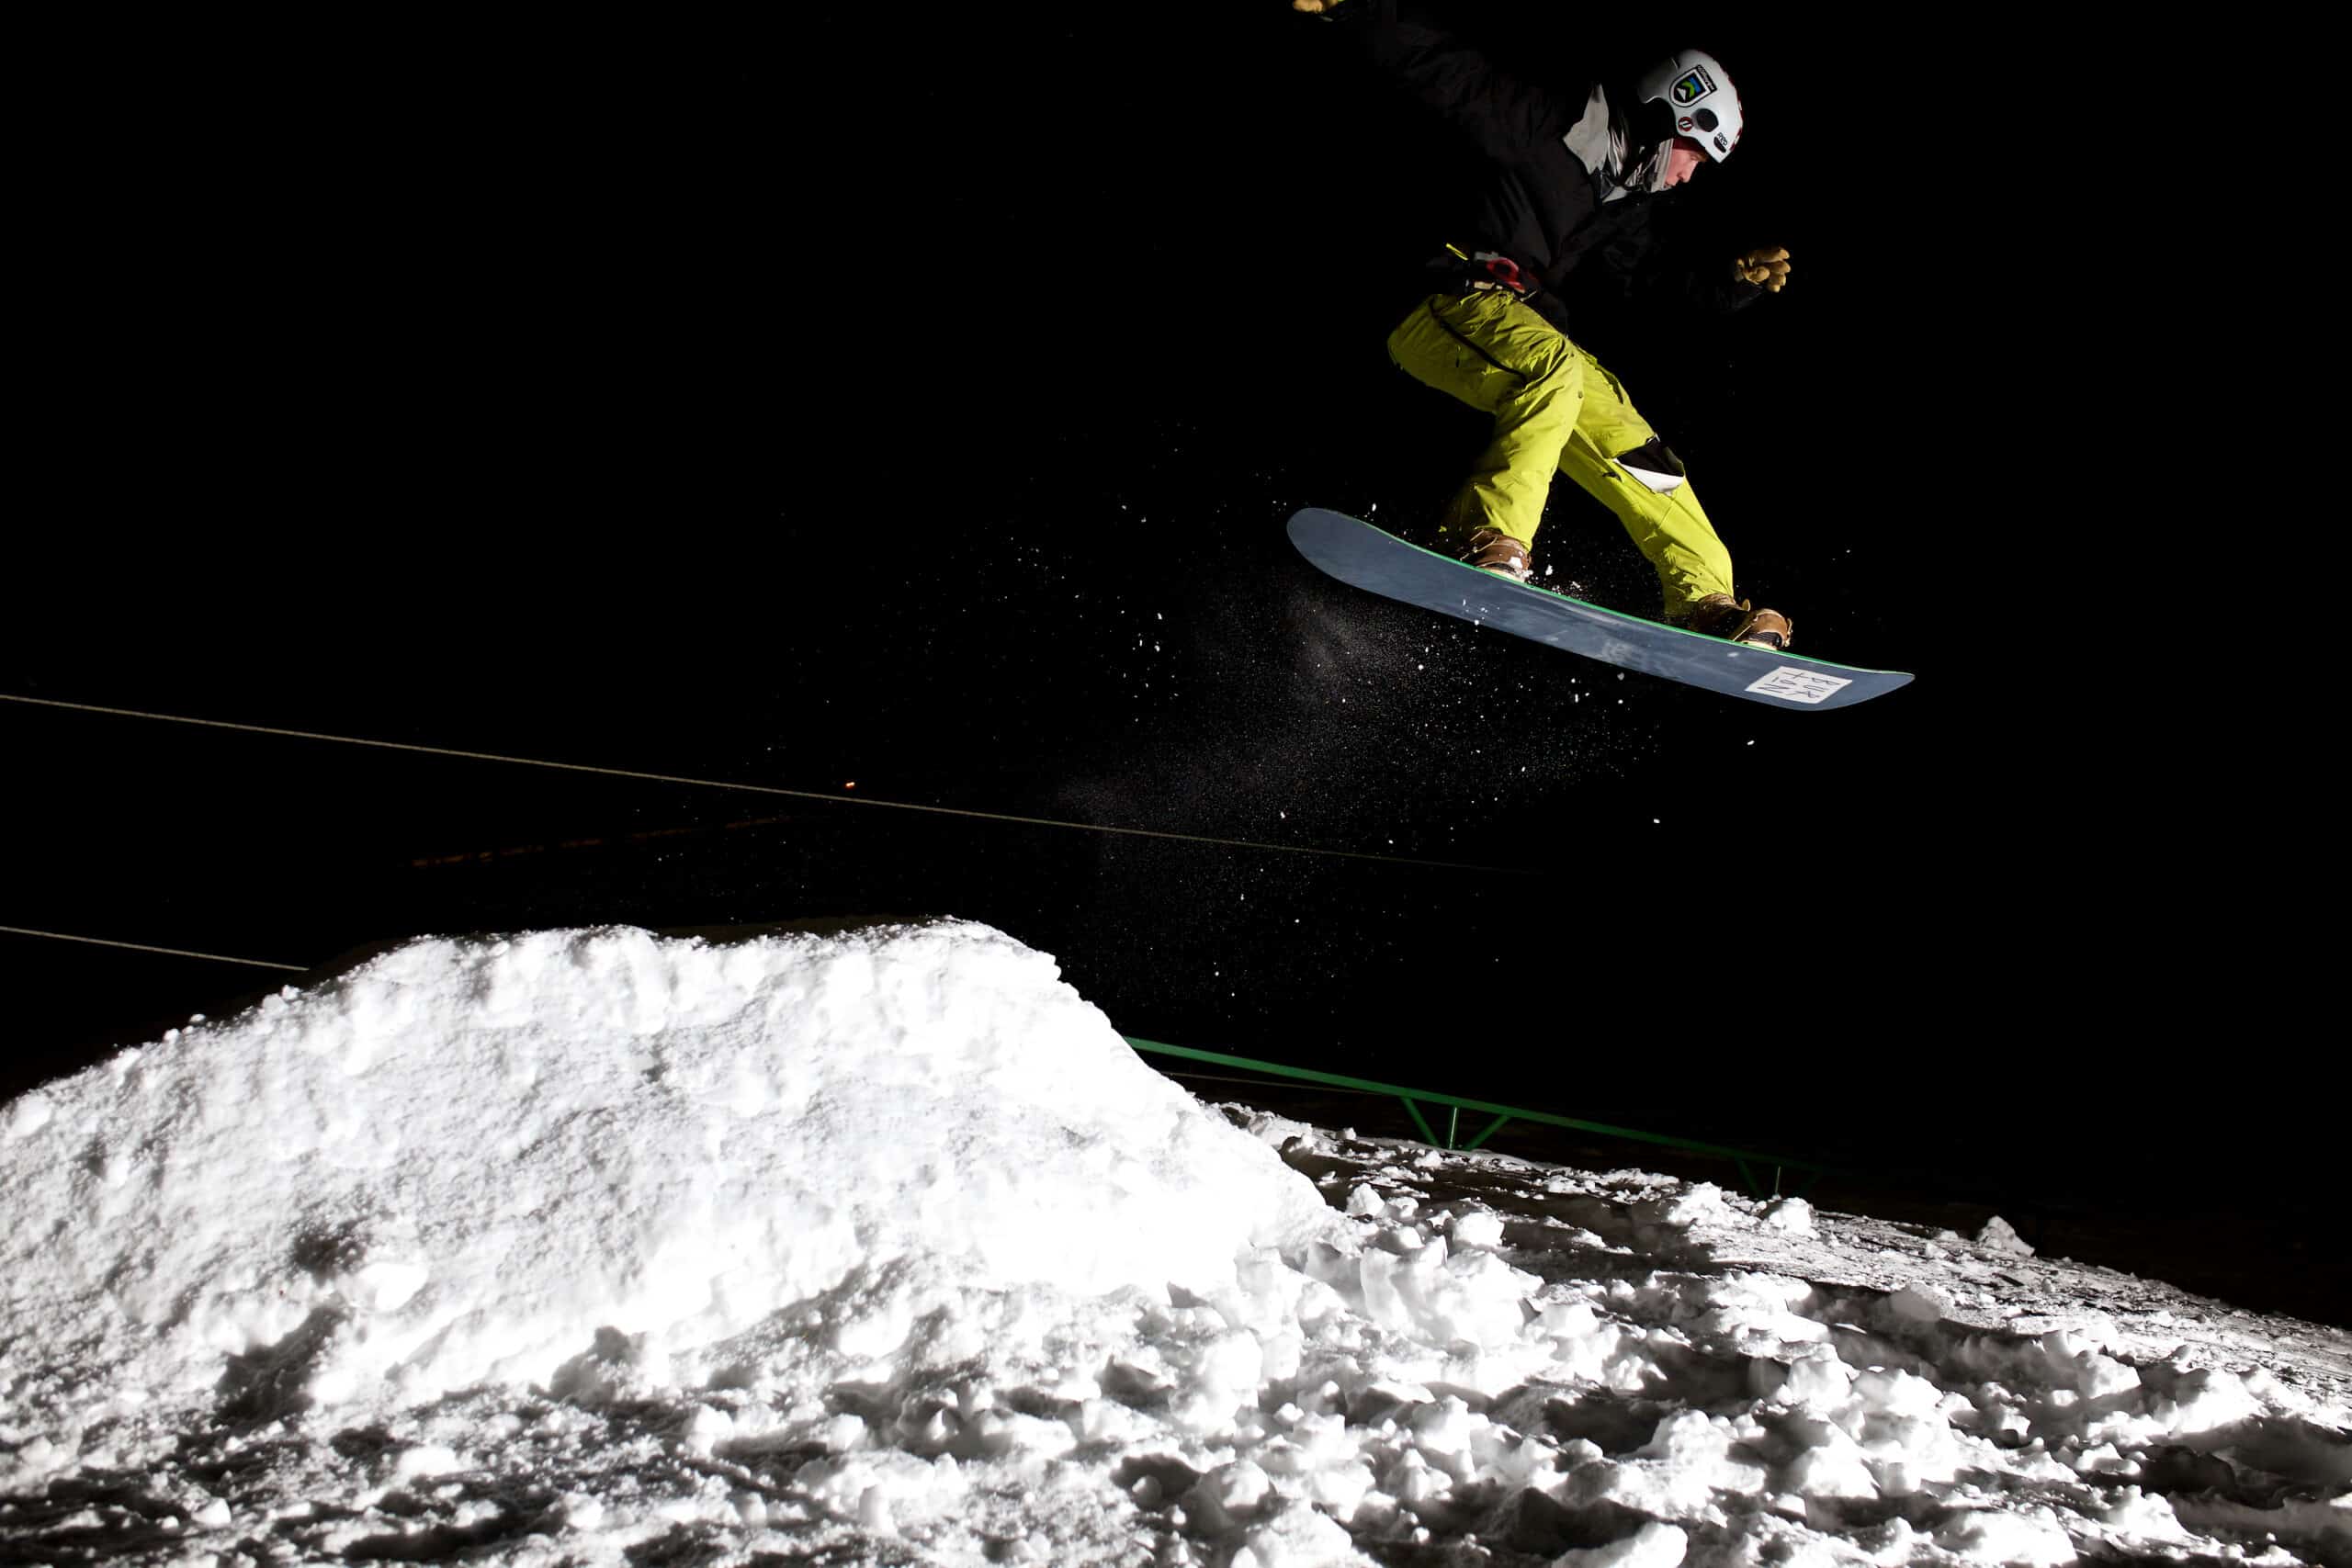 A snowboarder with yellow pants jumping high in the air after hitting a snow ramp.